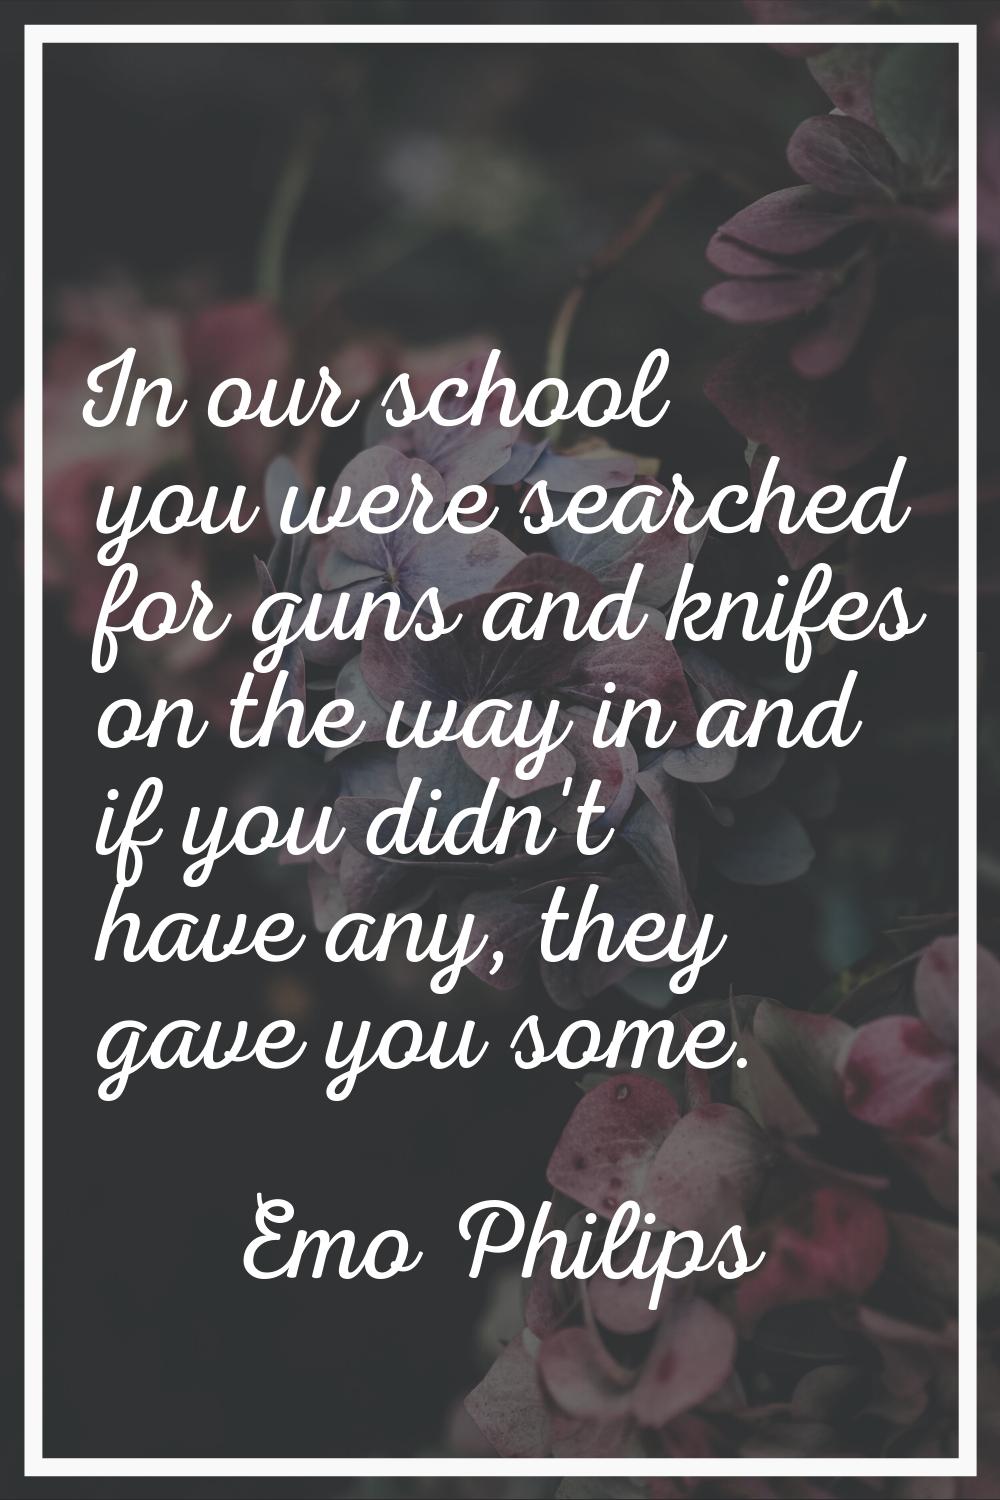 In our school you were searched for guns and knifes on the way in and if you didn't have any, they 